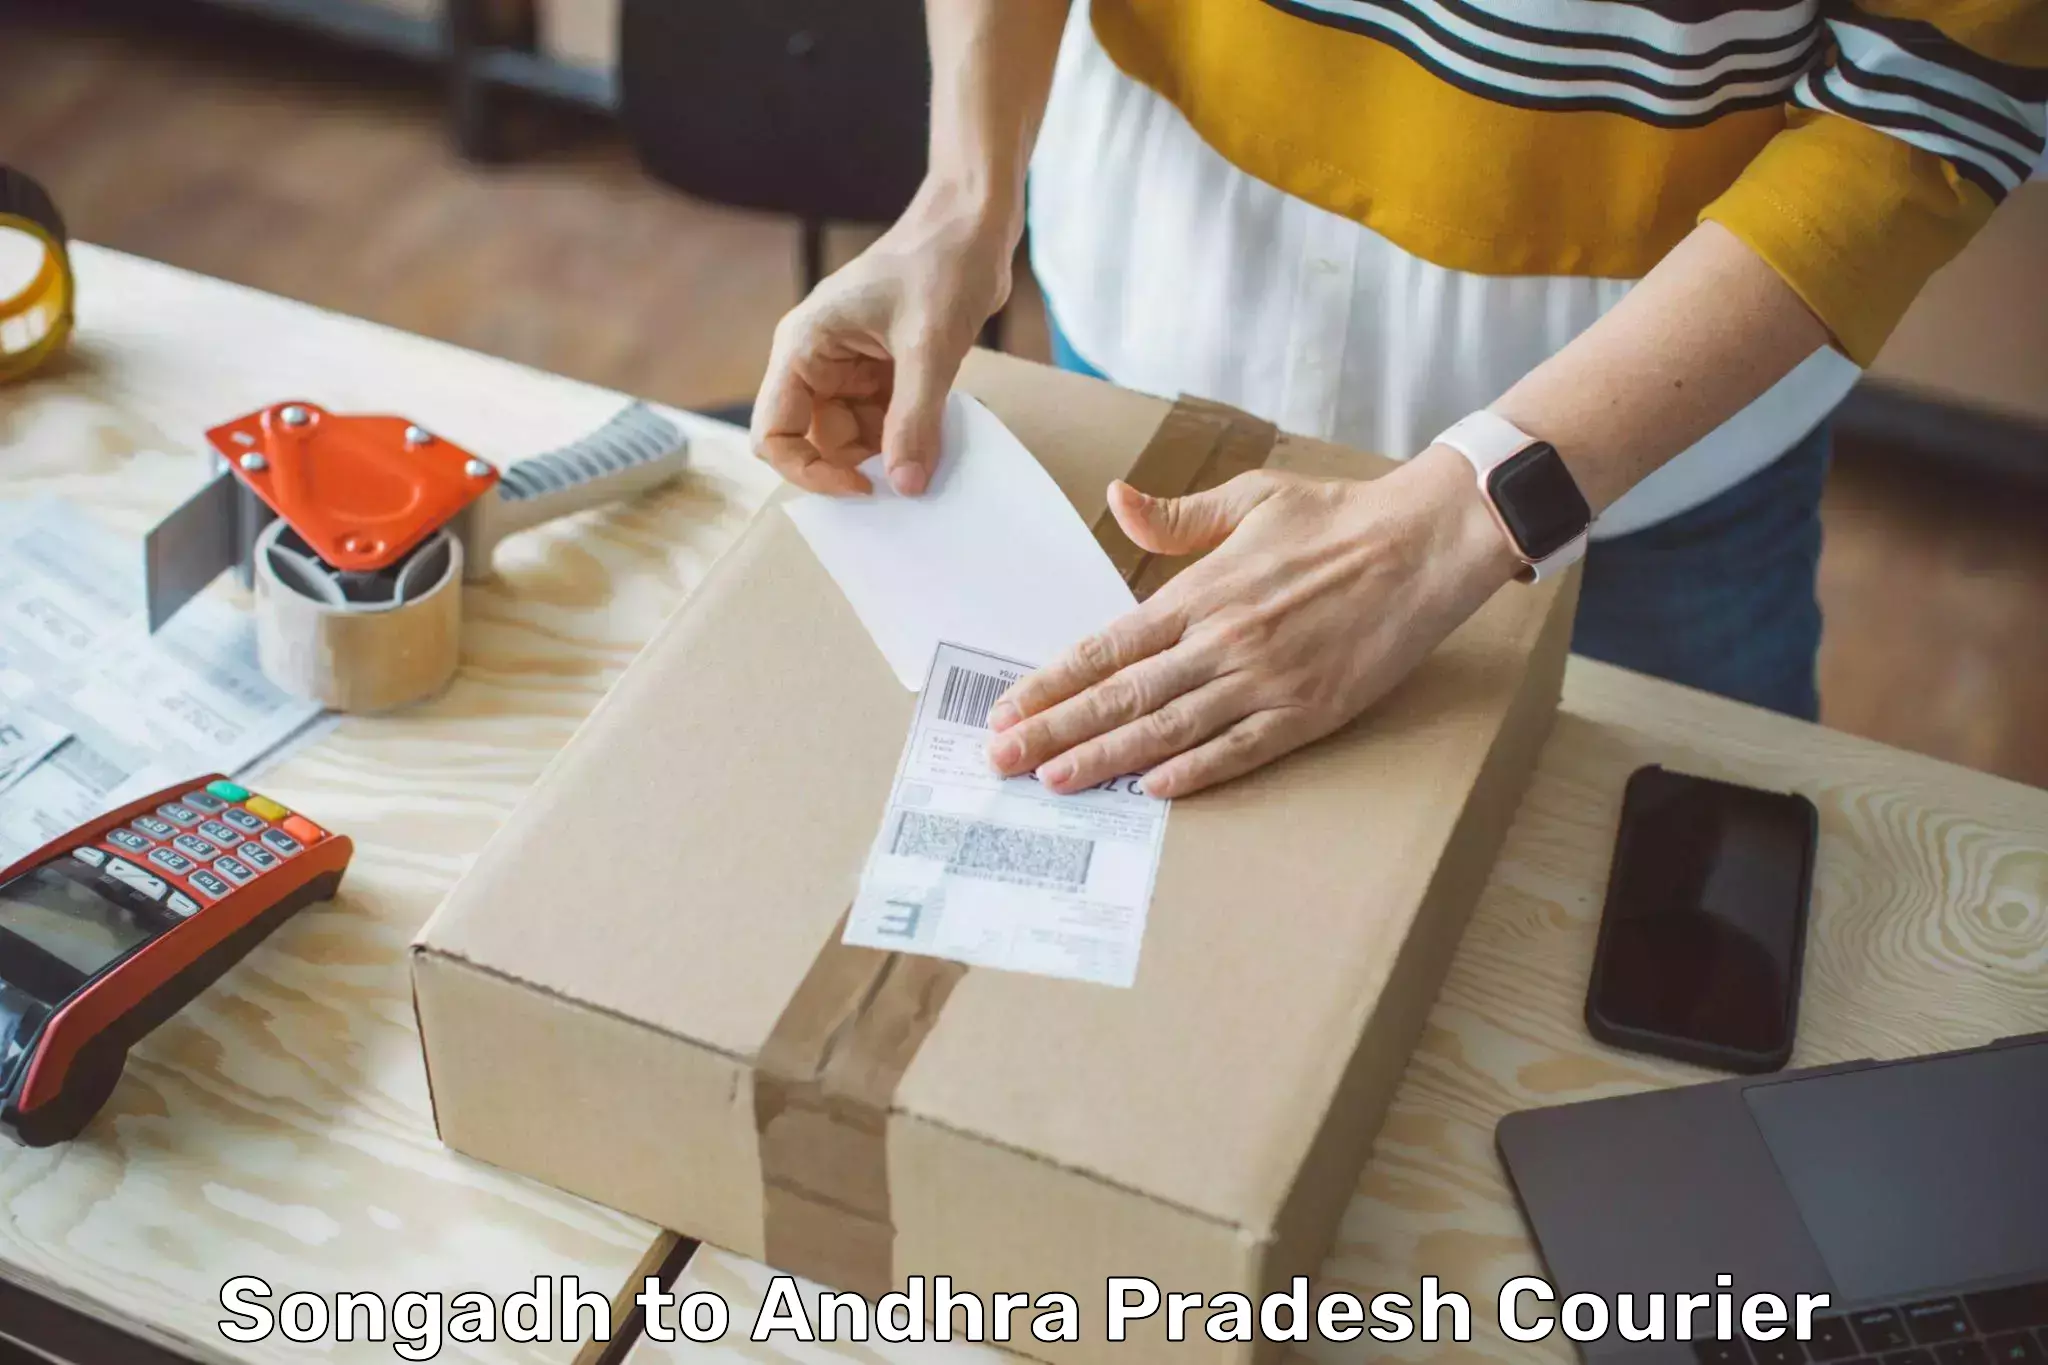 Reliable delivery network Songadh to Andhra Pradesh